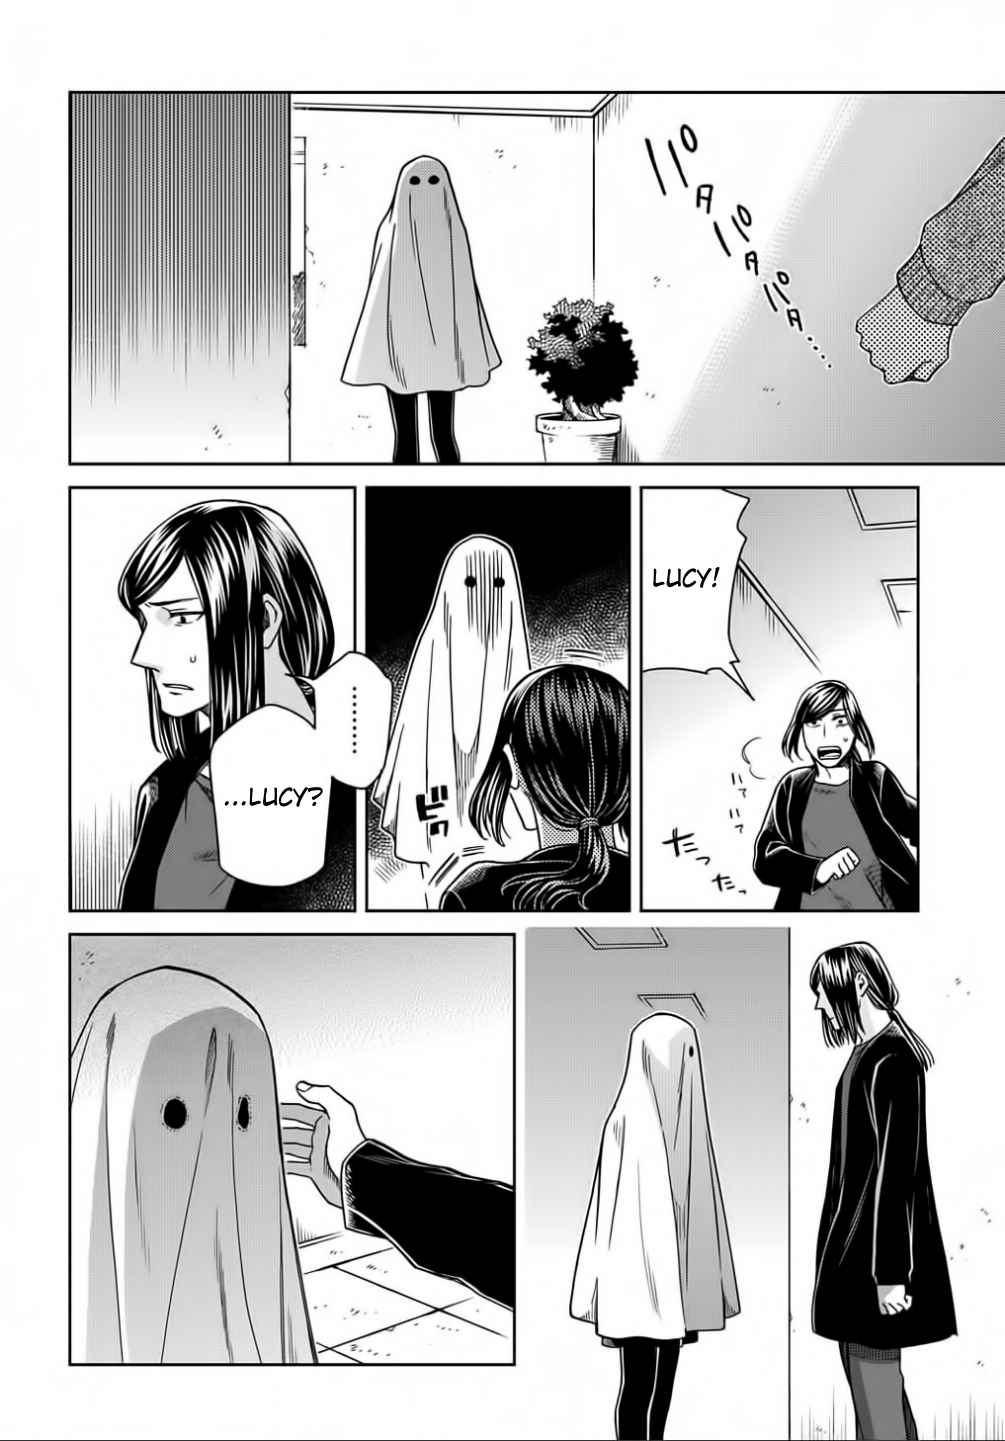 The Ancient Magus' Bride Vol. 14 Ch. 70 A small leak will sink a great ship. V